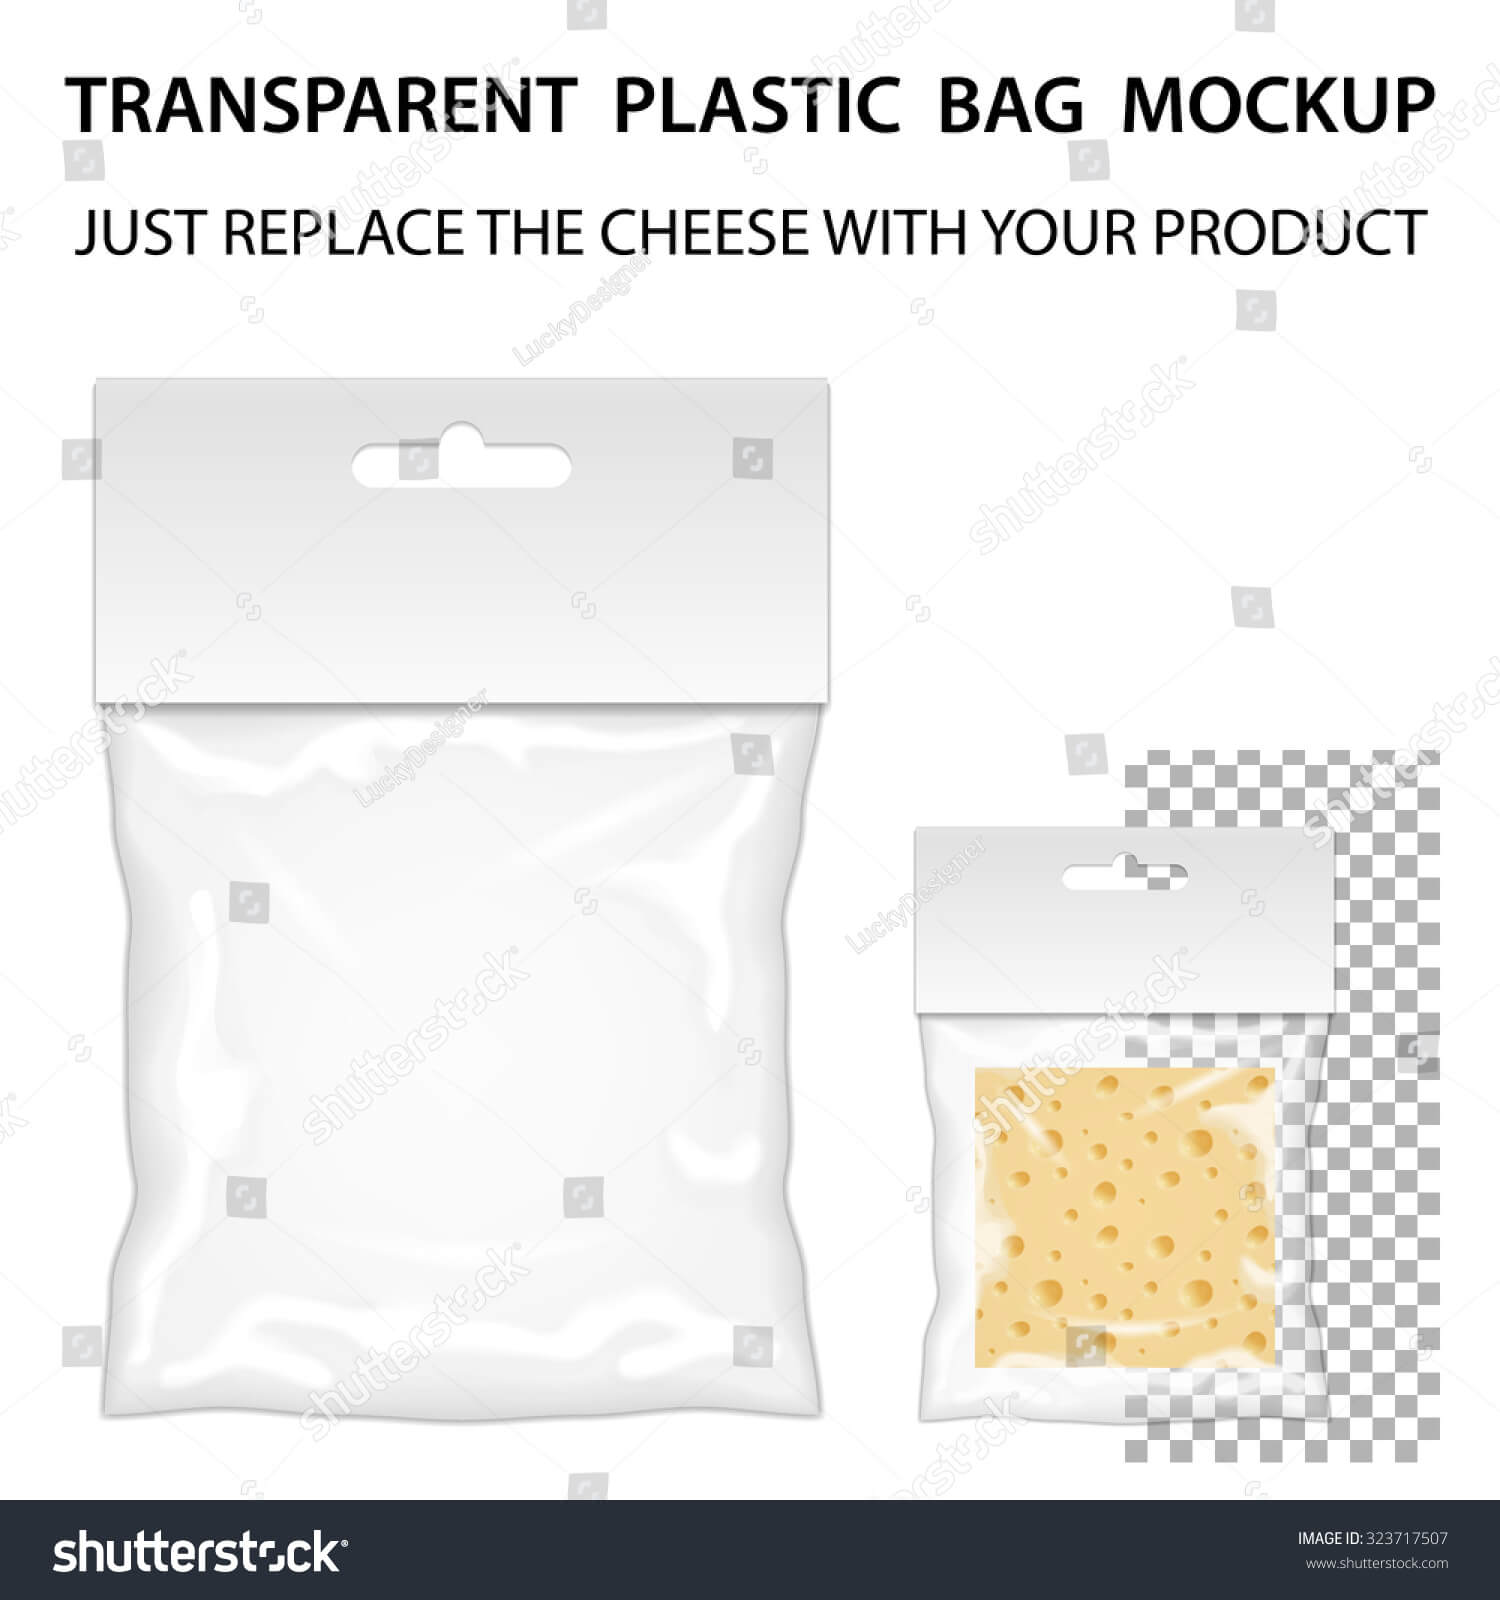 Transparent Plastic Bag Mockup Ready Your Stock Vector For Blank Packaging Templates